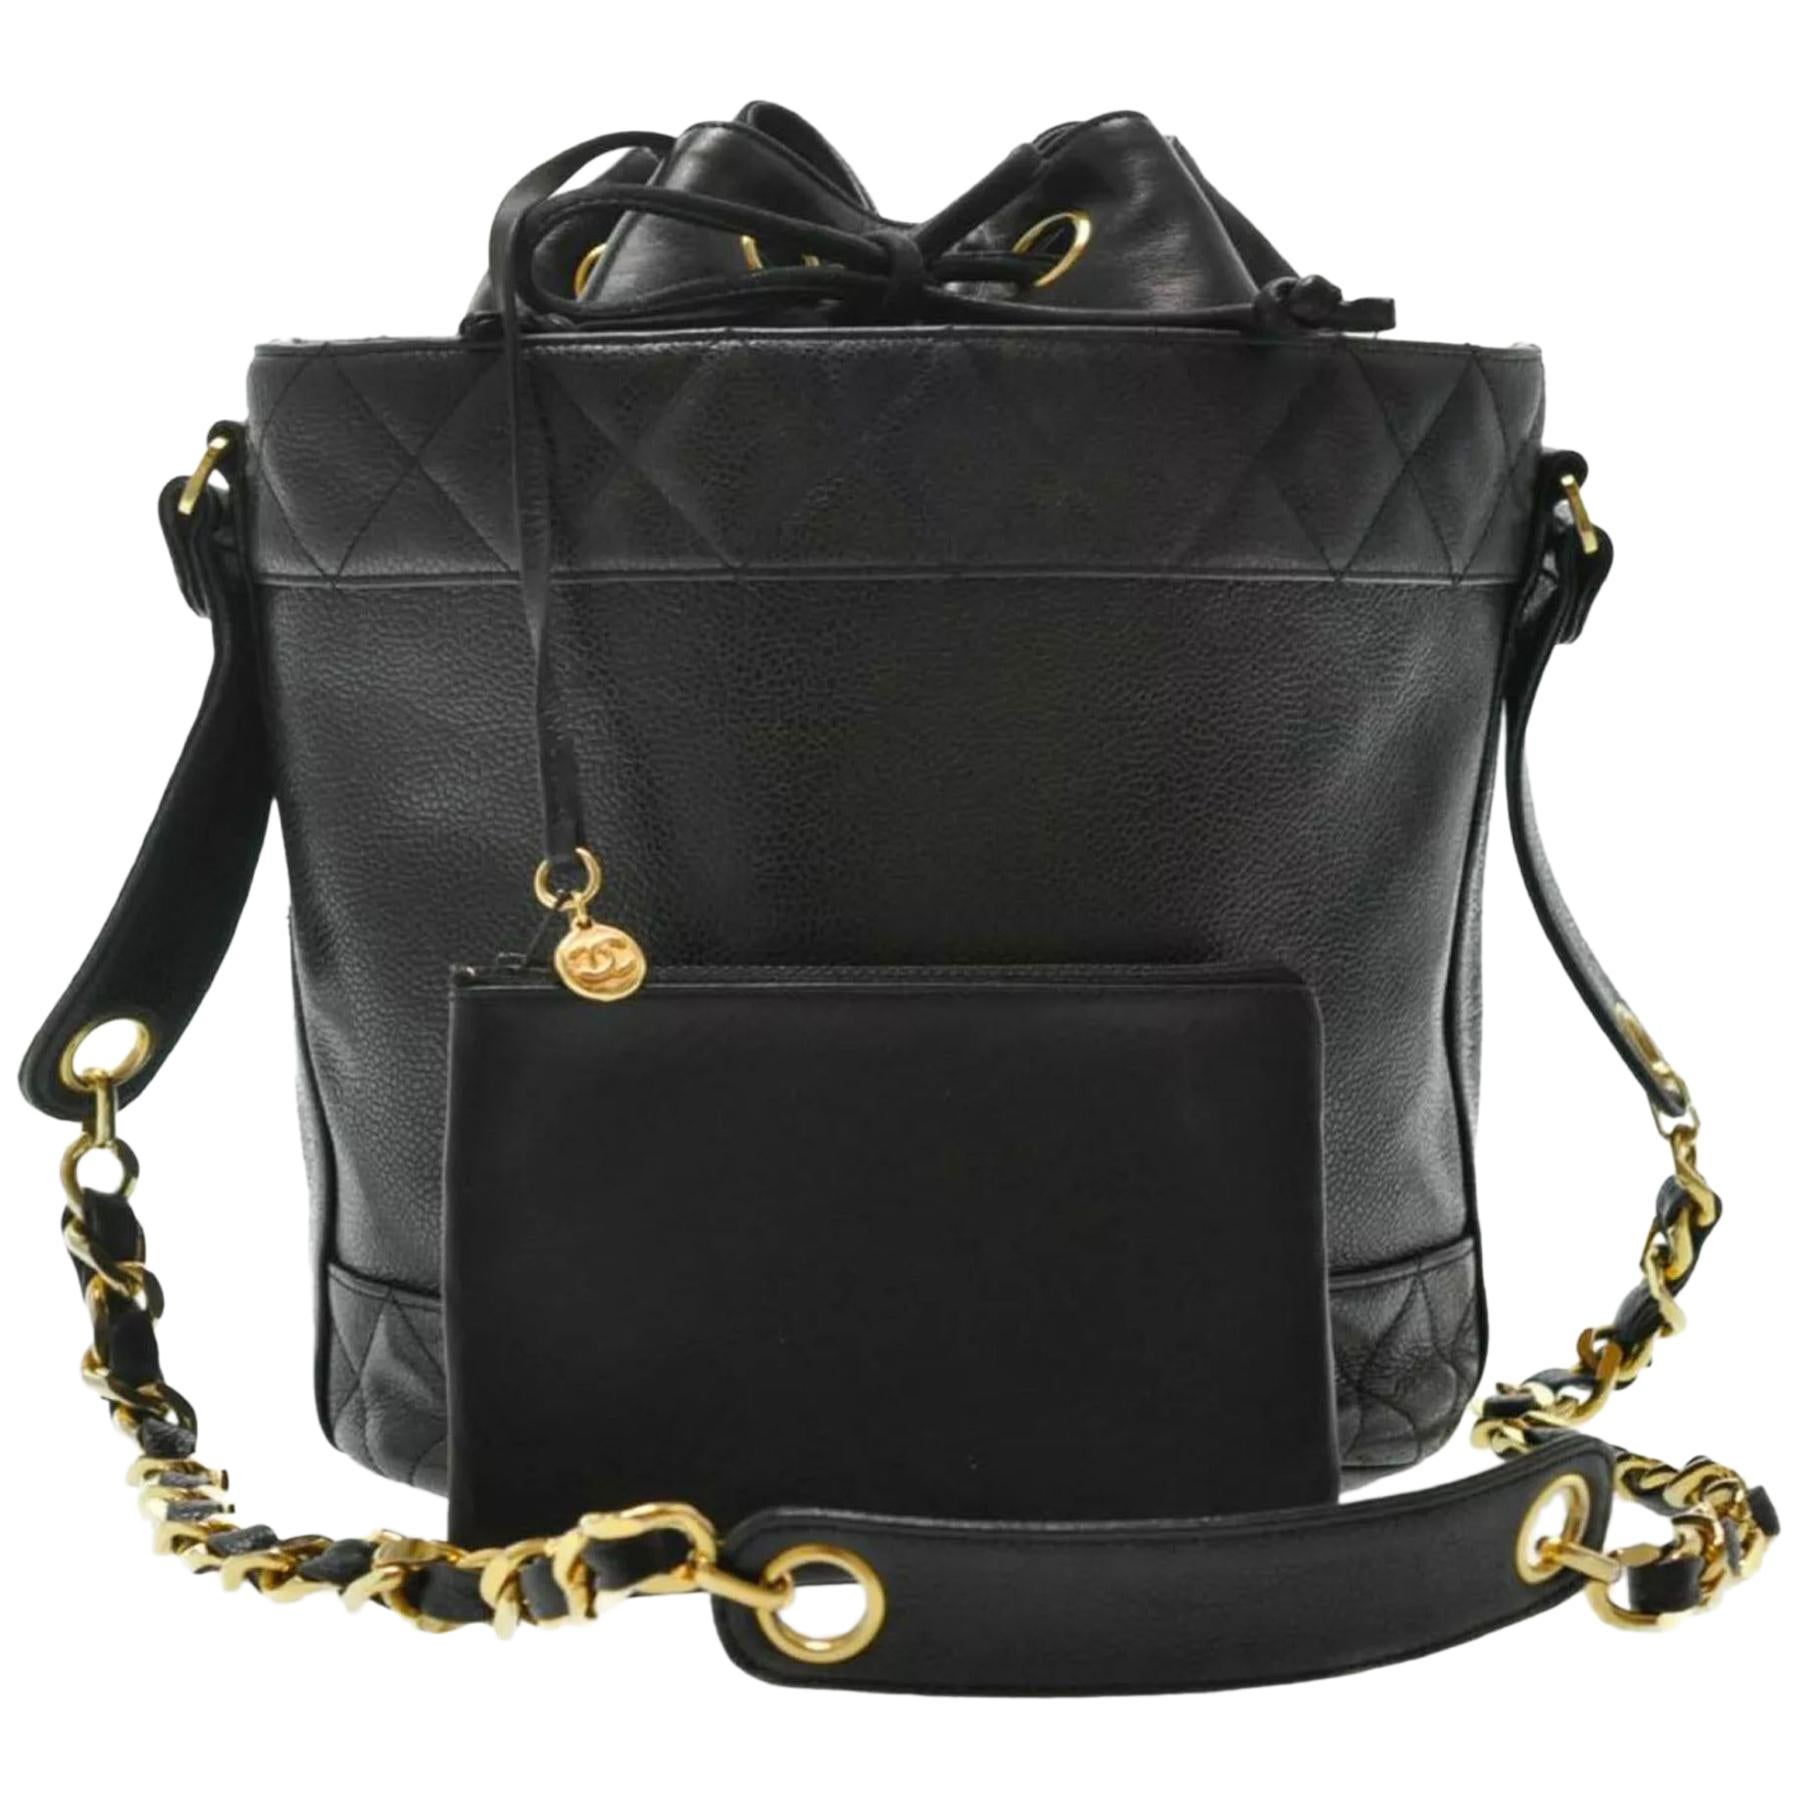 Chanel 90's Black Iconic Bucket Bag

Color: black, gold
Condition: Very Good; minor fading on hardware. please refer to photos.
Dimensions: 9